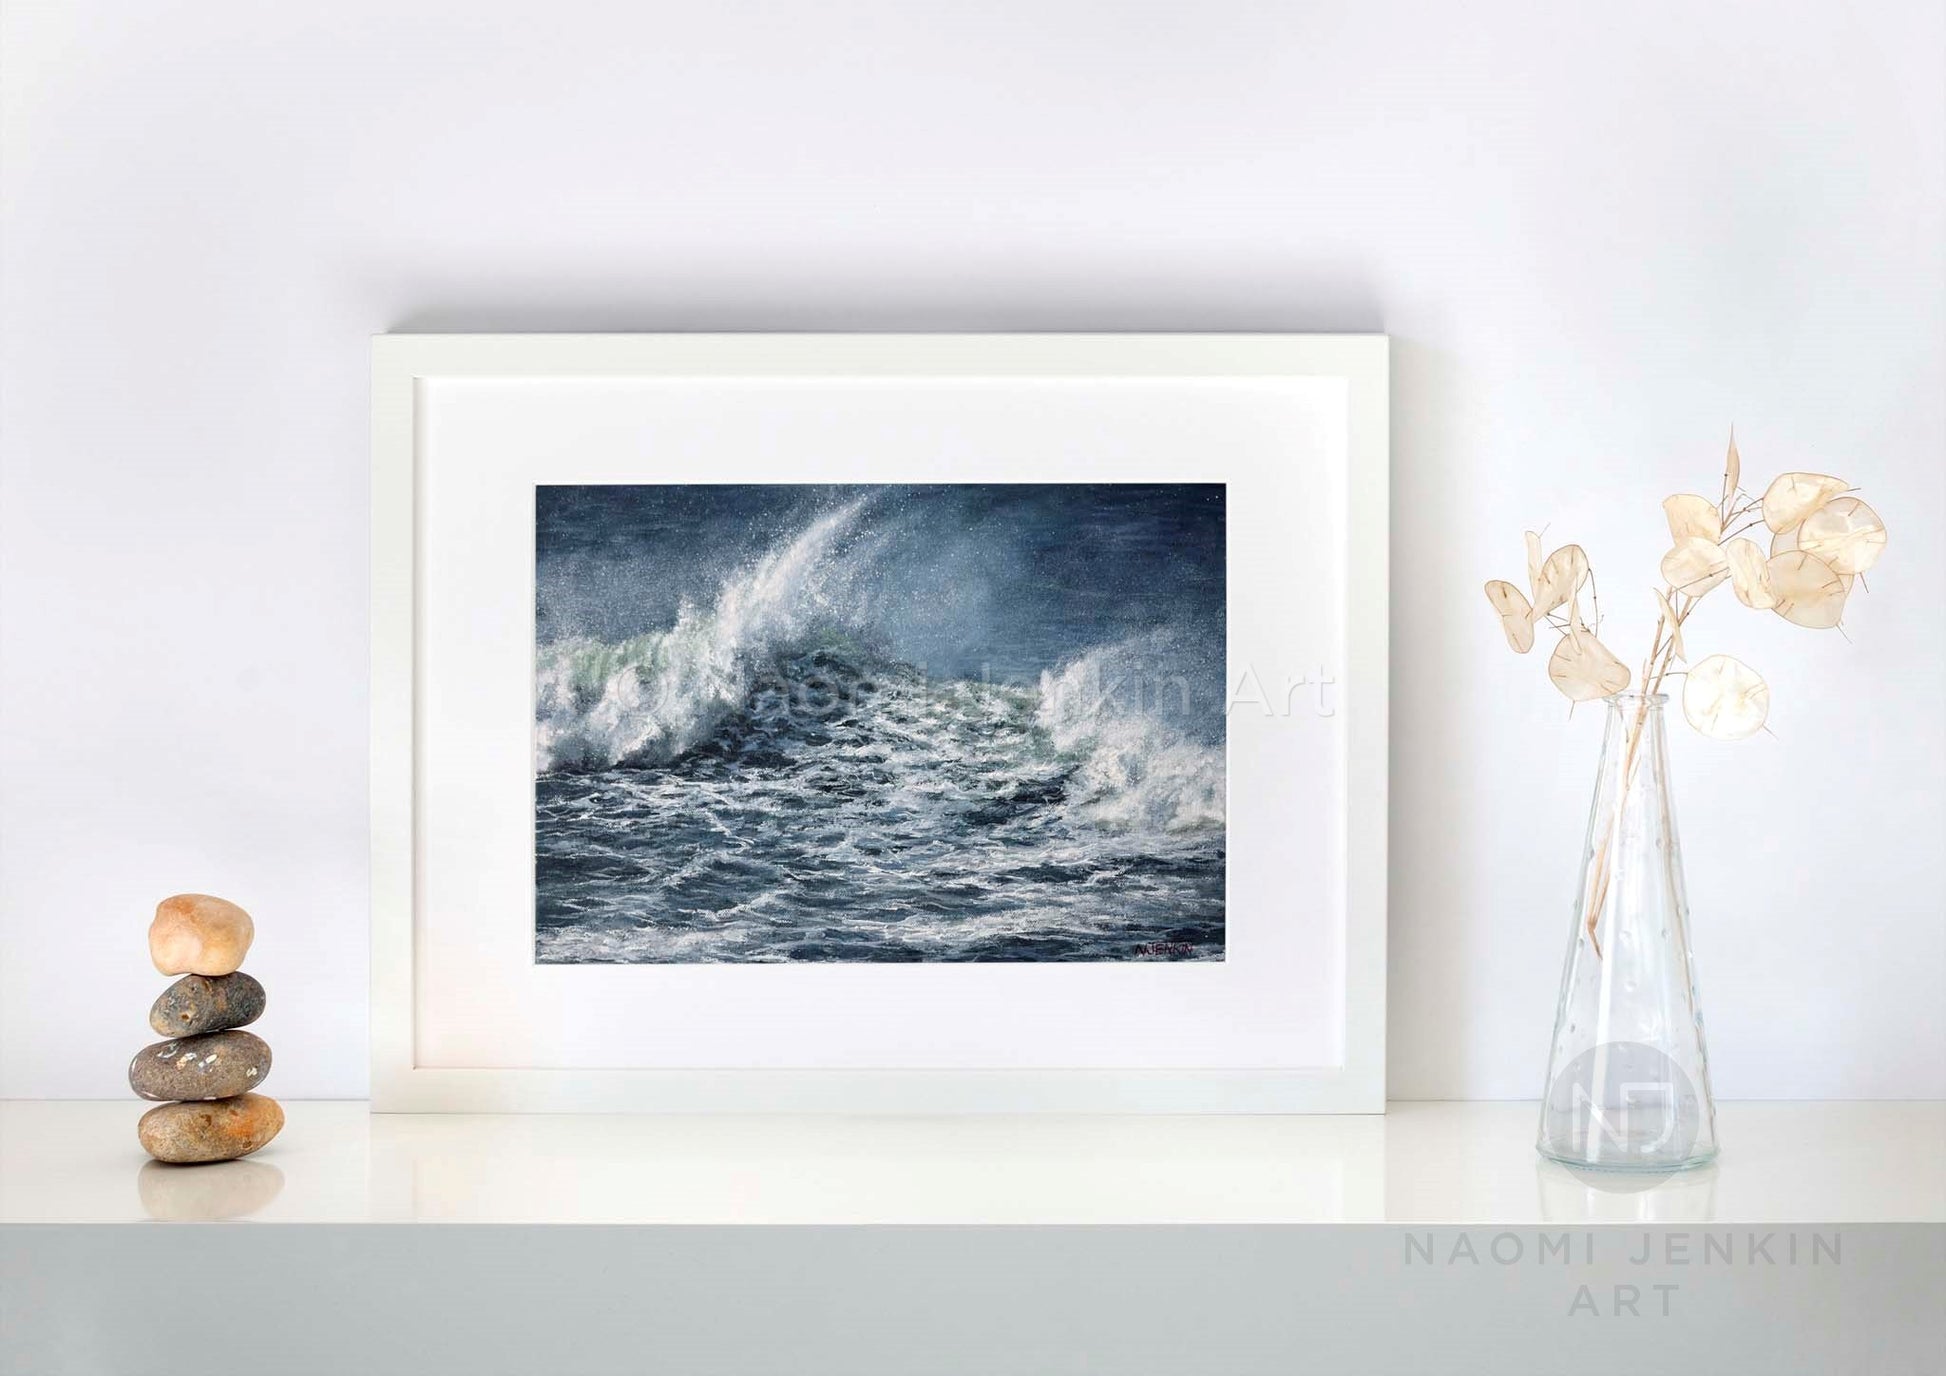 Seascape print 'Wind Whipped' by artist Naomi Jenkin Art in a white frame